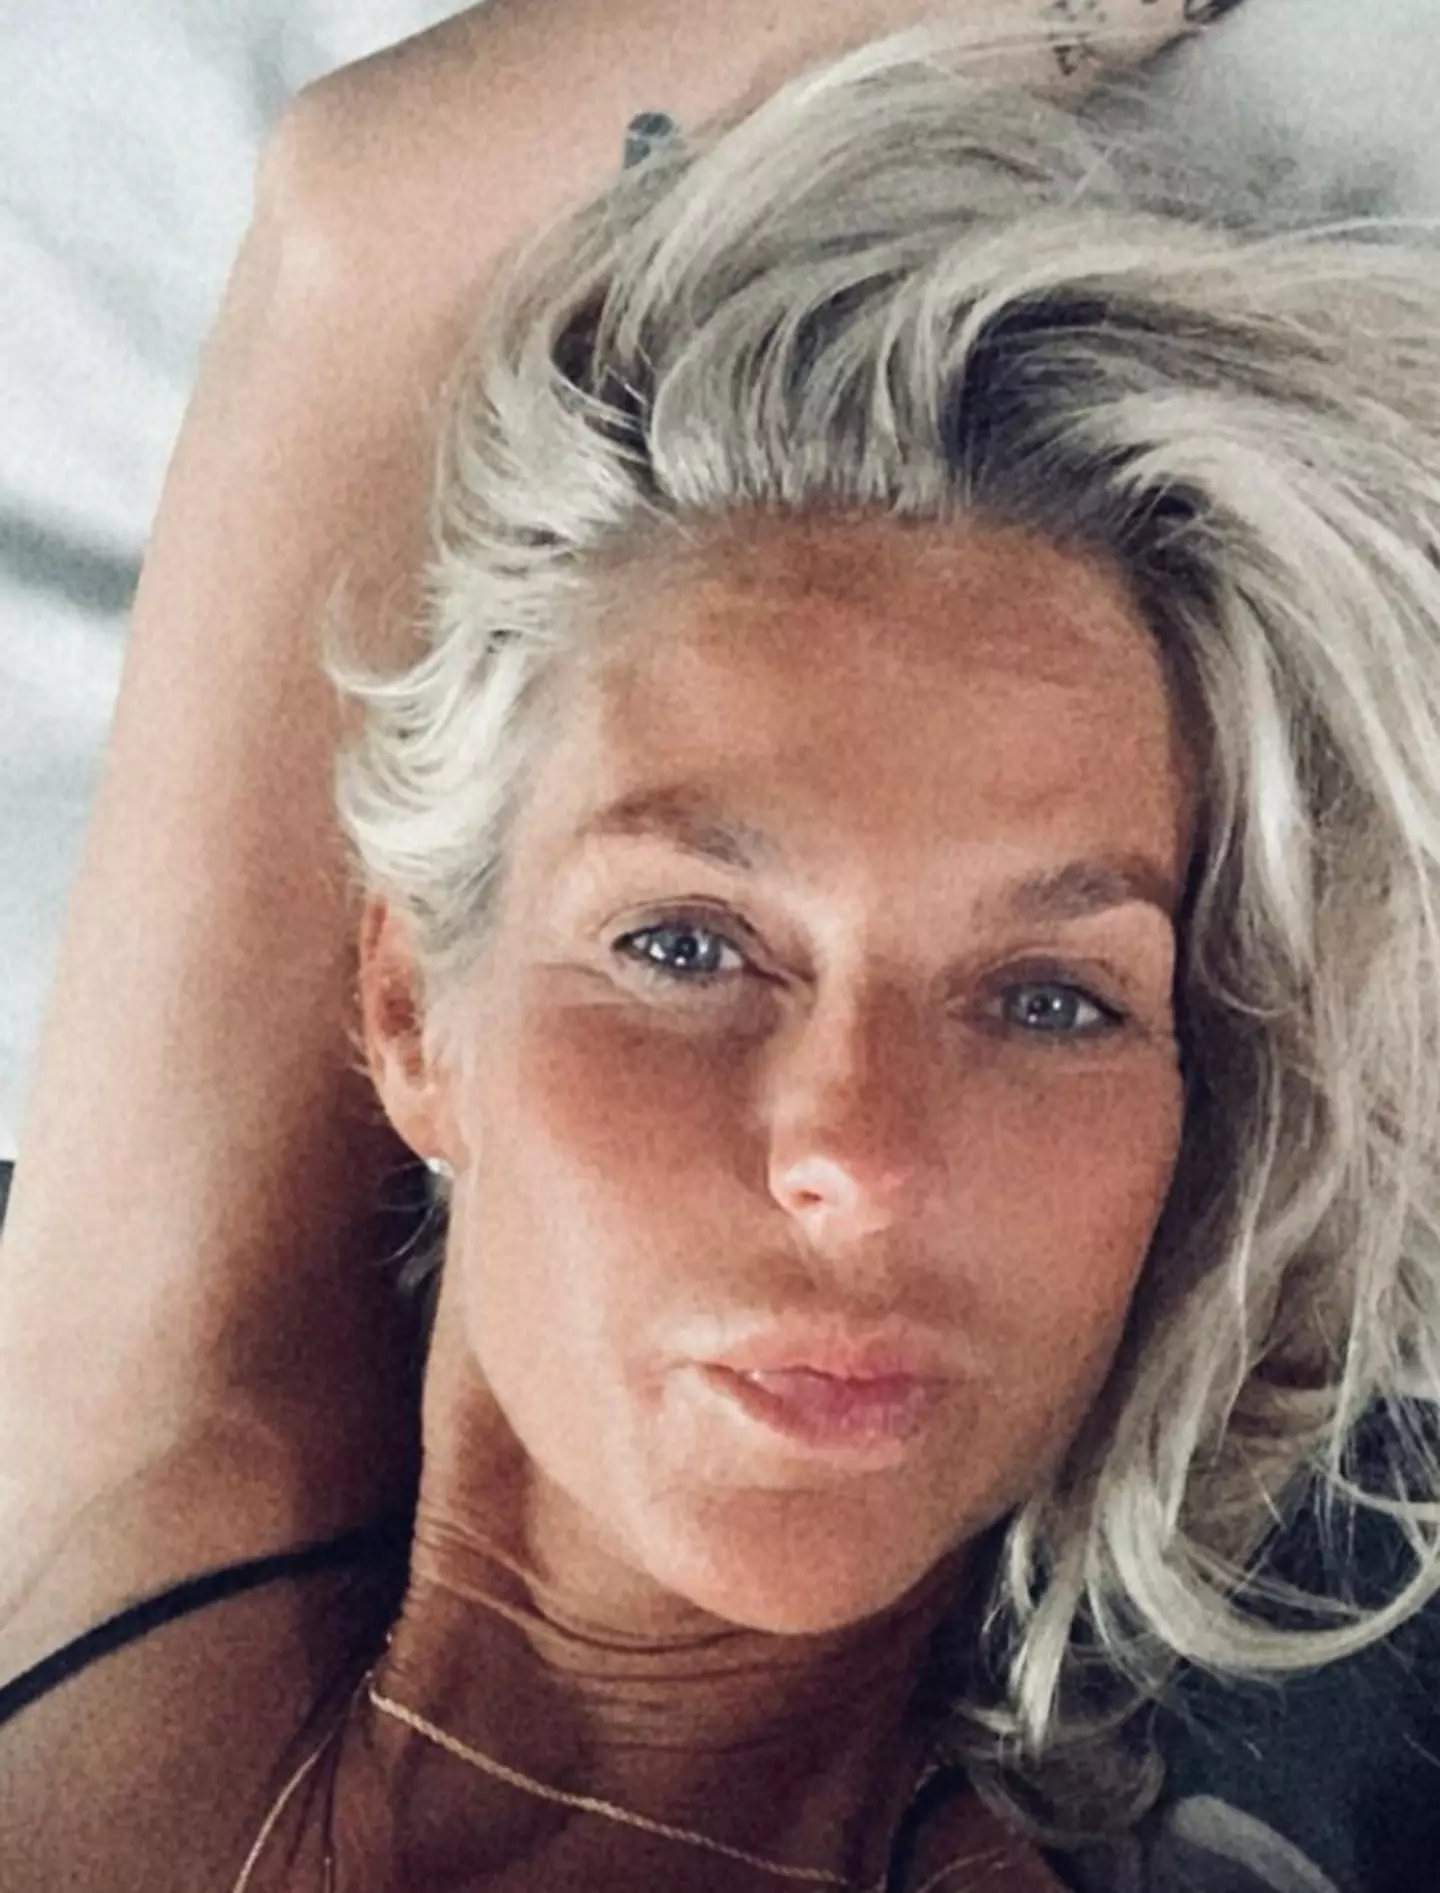 Ulrika Jonsson says she was groped by Rolf Harris in the 1980s.